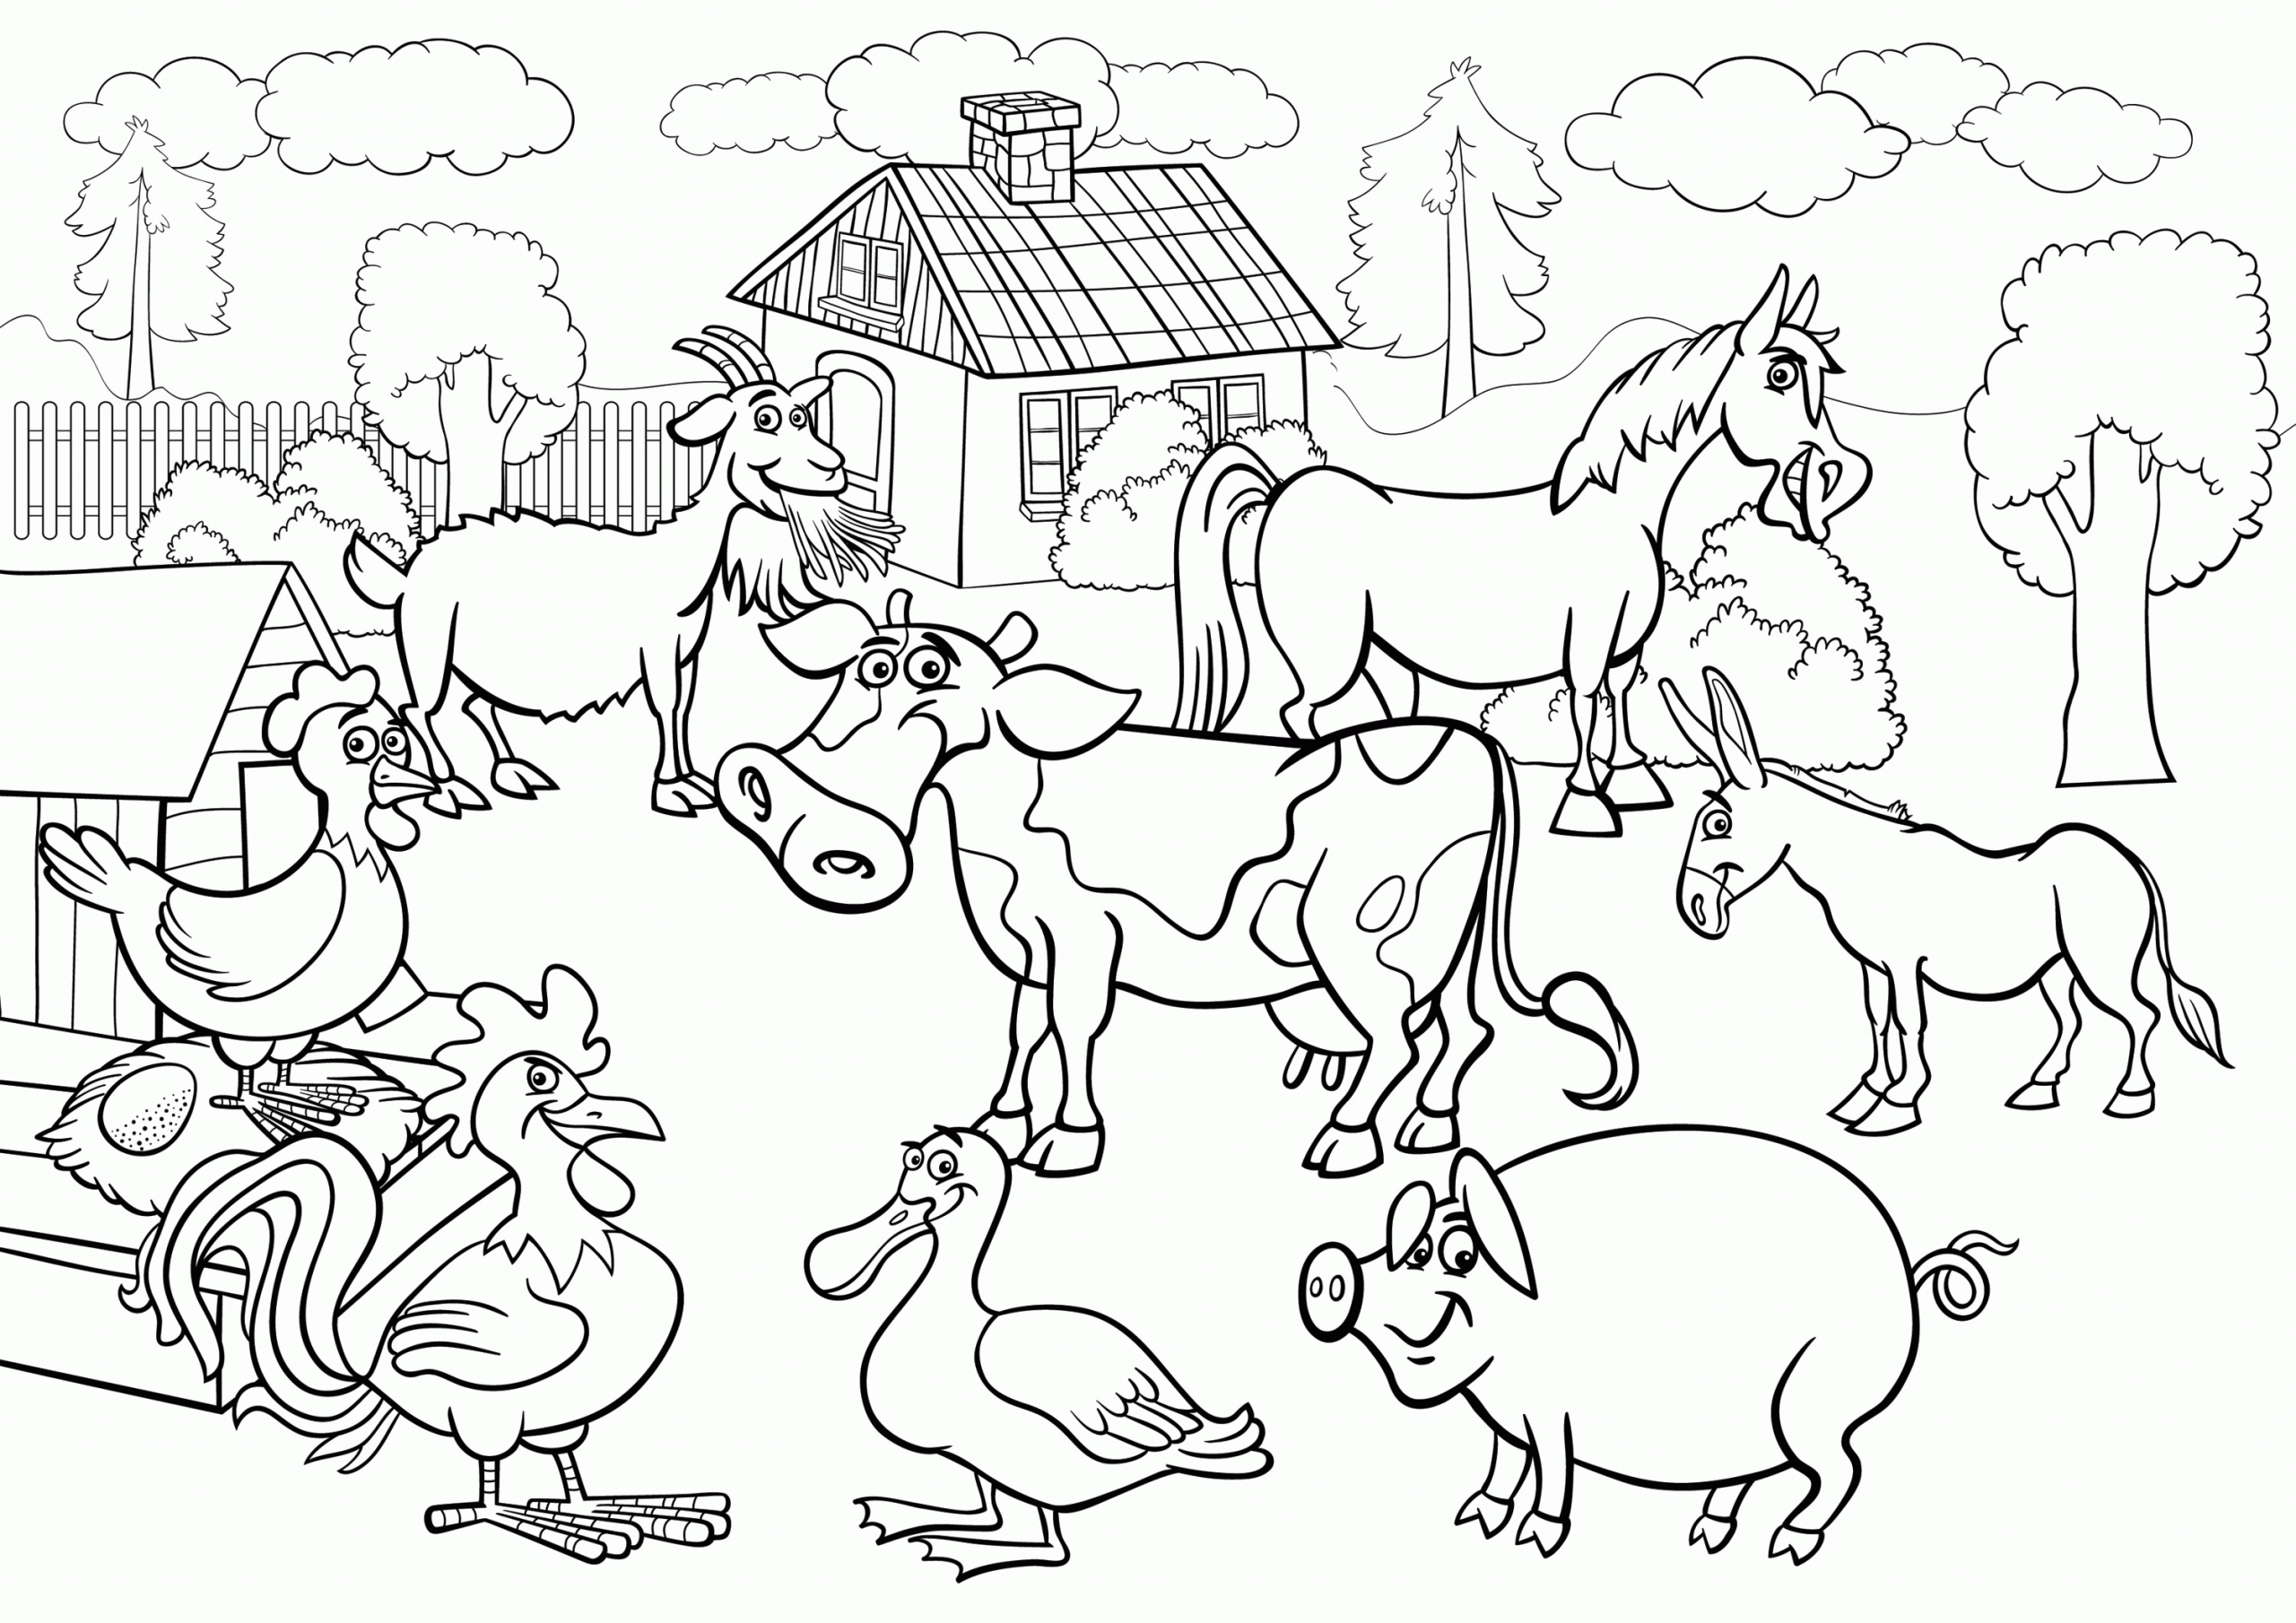 Animals in a Farm Coloring Page   Free Printable Coloring Pages ...